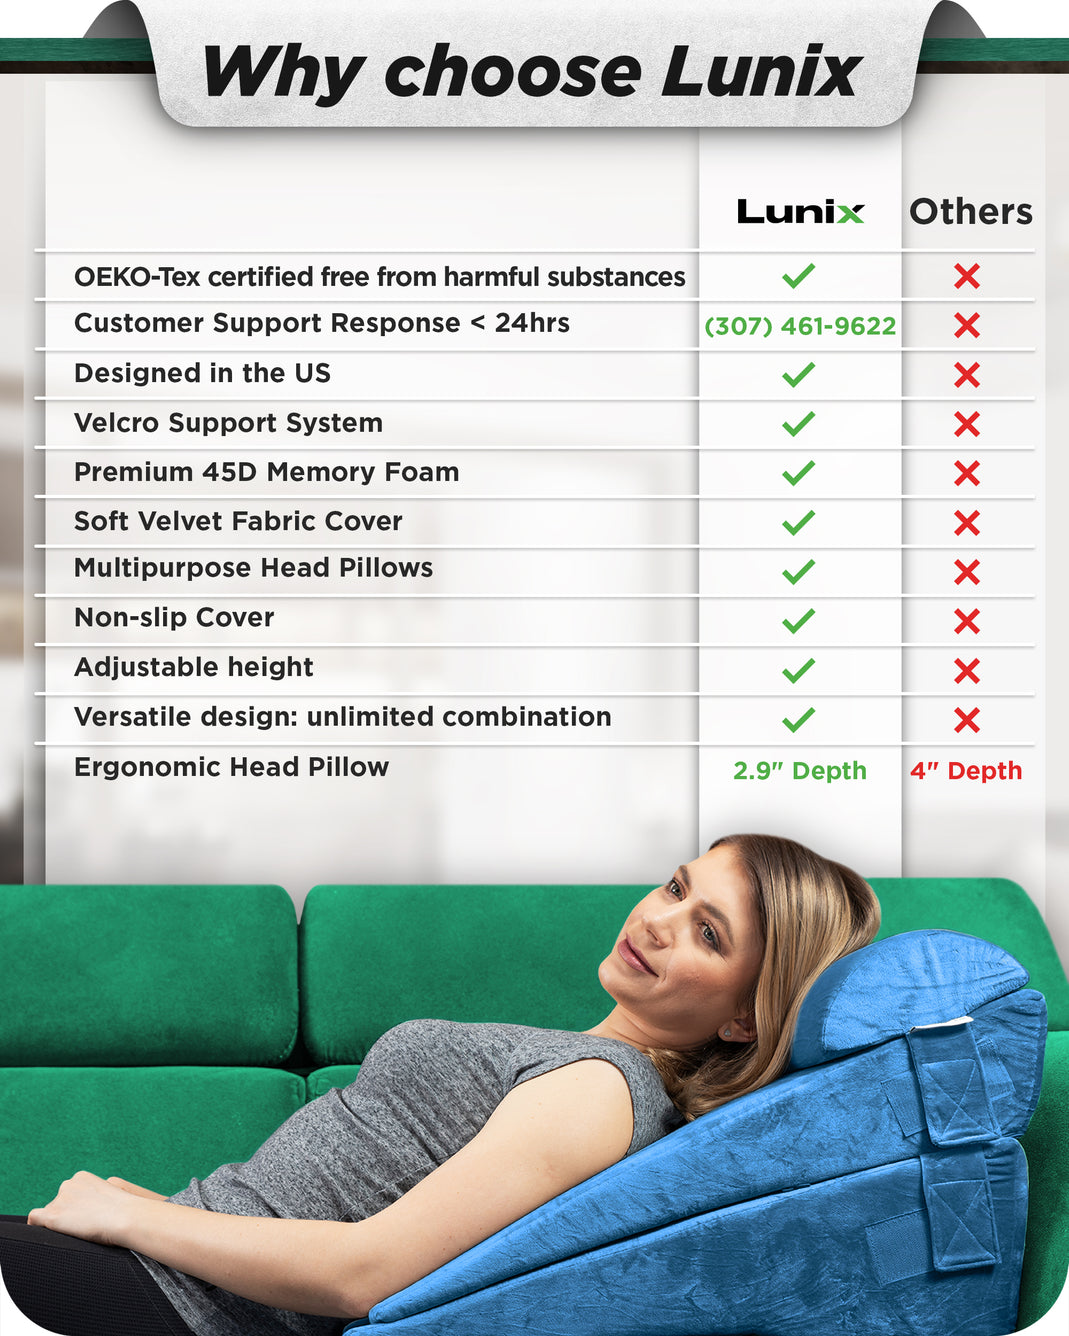 Lunix LX5 4pcs Orthopedic Bed Wedge Pillow Set, Post Surgery Memory Foam for Back, Neck and Leg Pain Relief, Sitting Pillow, Comfortable and Adjustabl